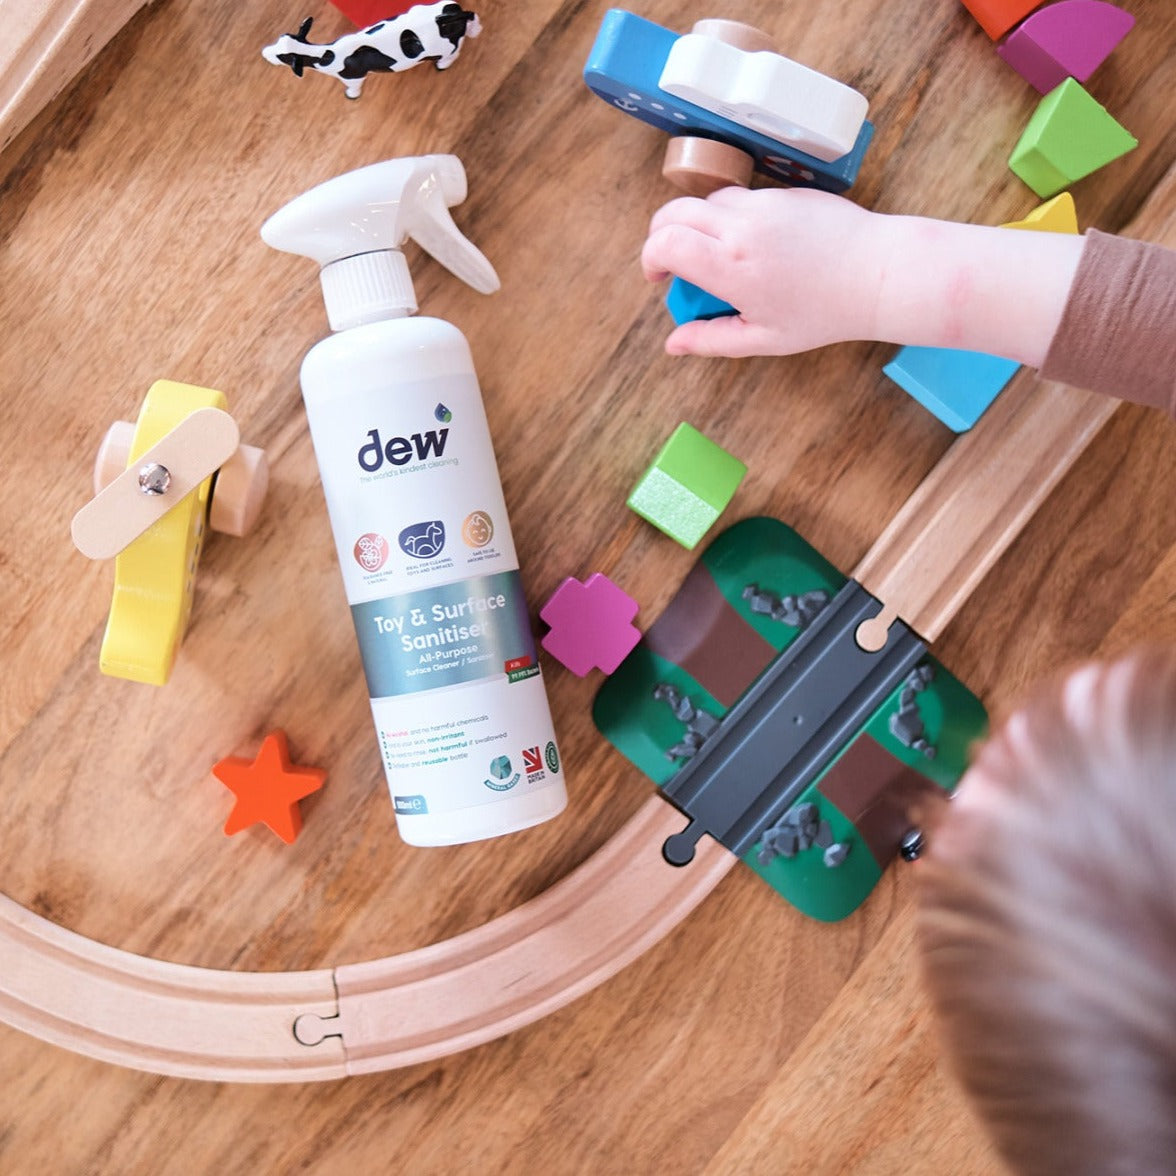 Dew: Disinfected measure for toys and other surfaces of the child 500ml